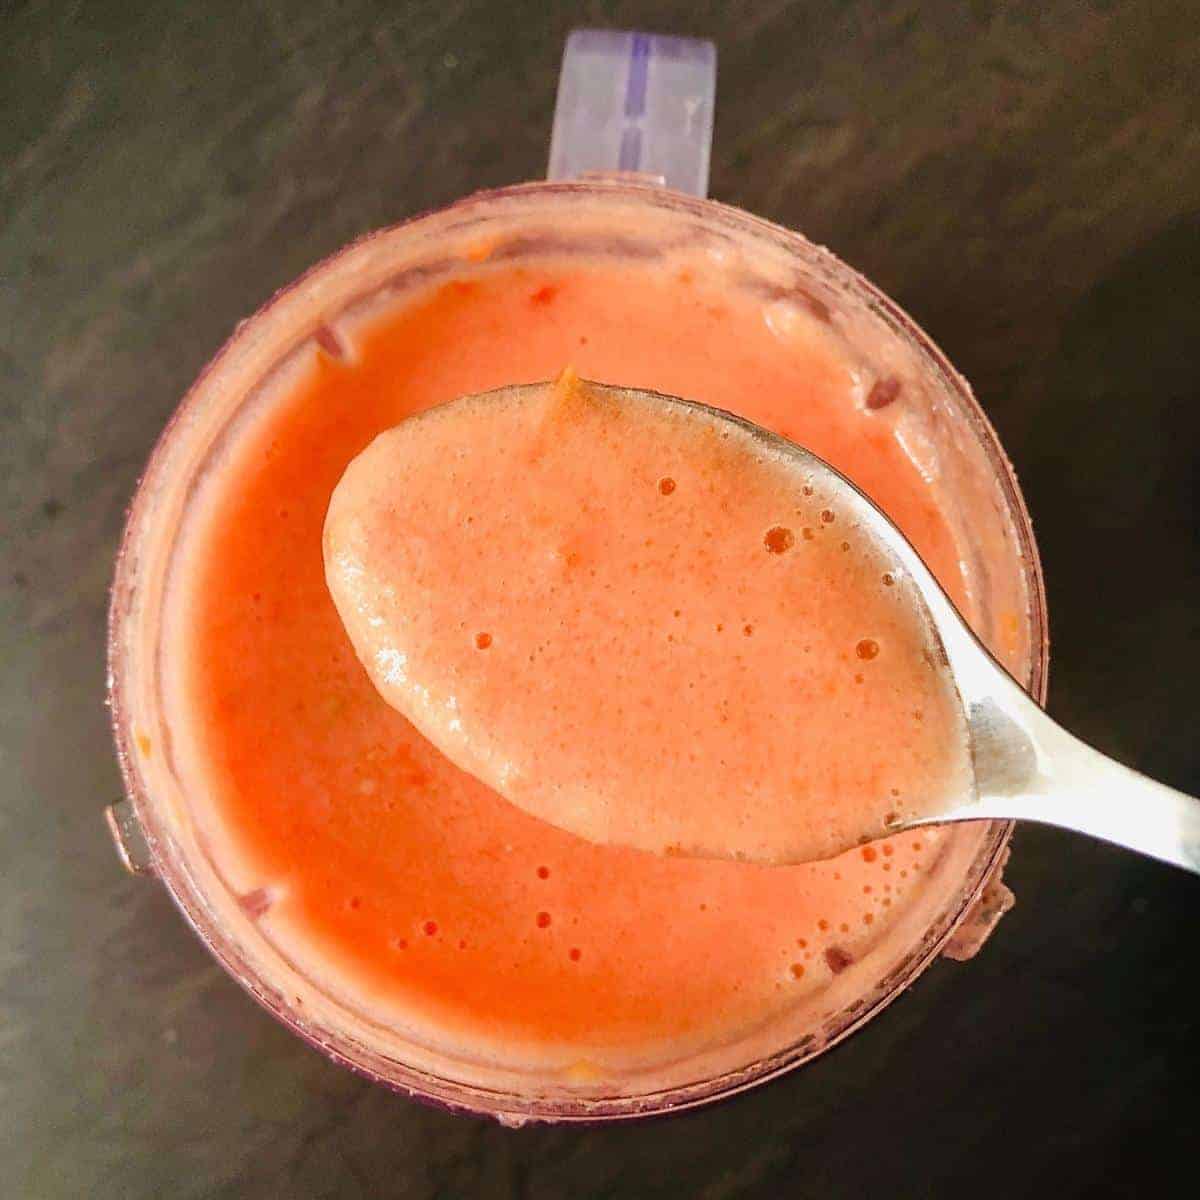 Tomato puree in a spoon held over a blender cup containing the tomato puree